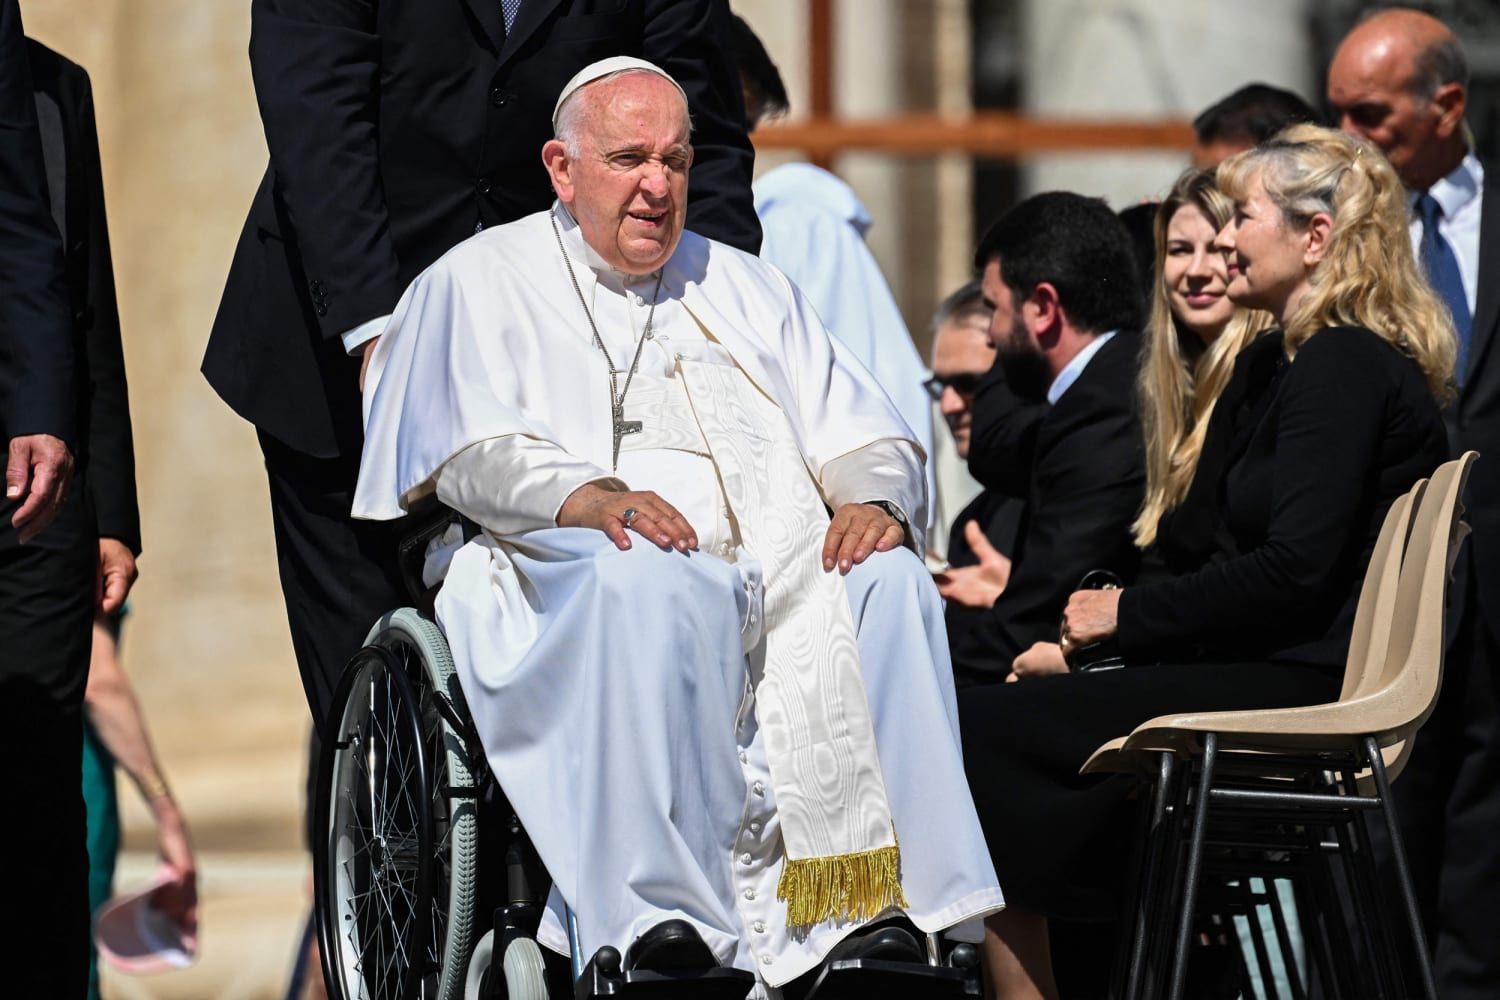 Pope Francis emerges from 3-hour abdominal opertion without complications